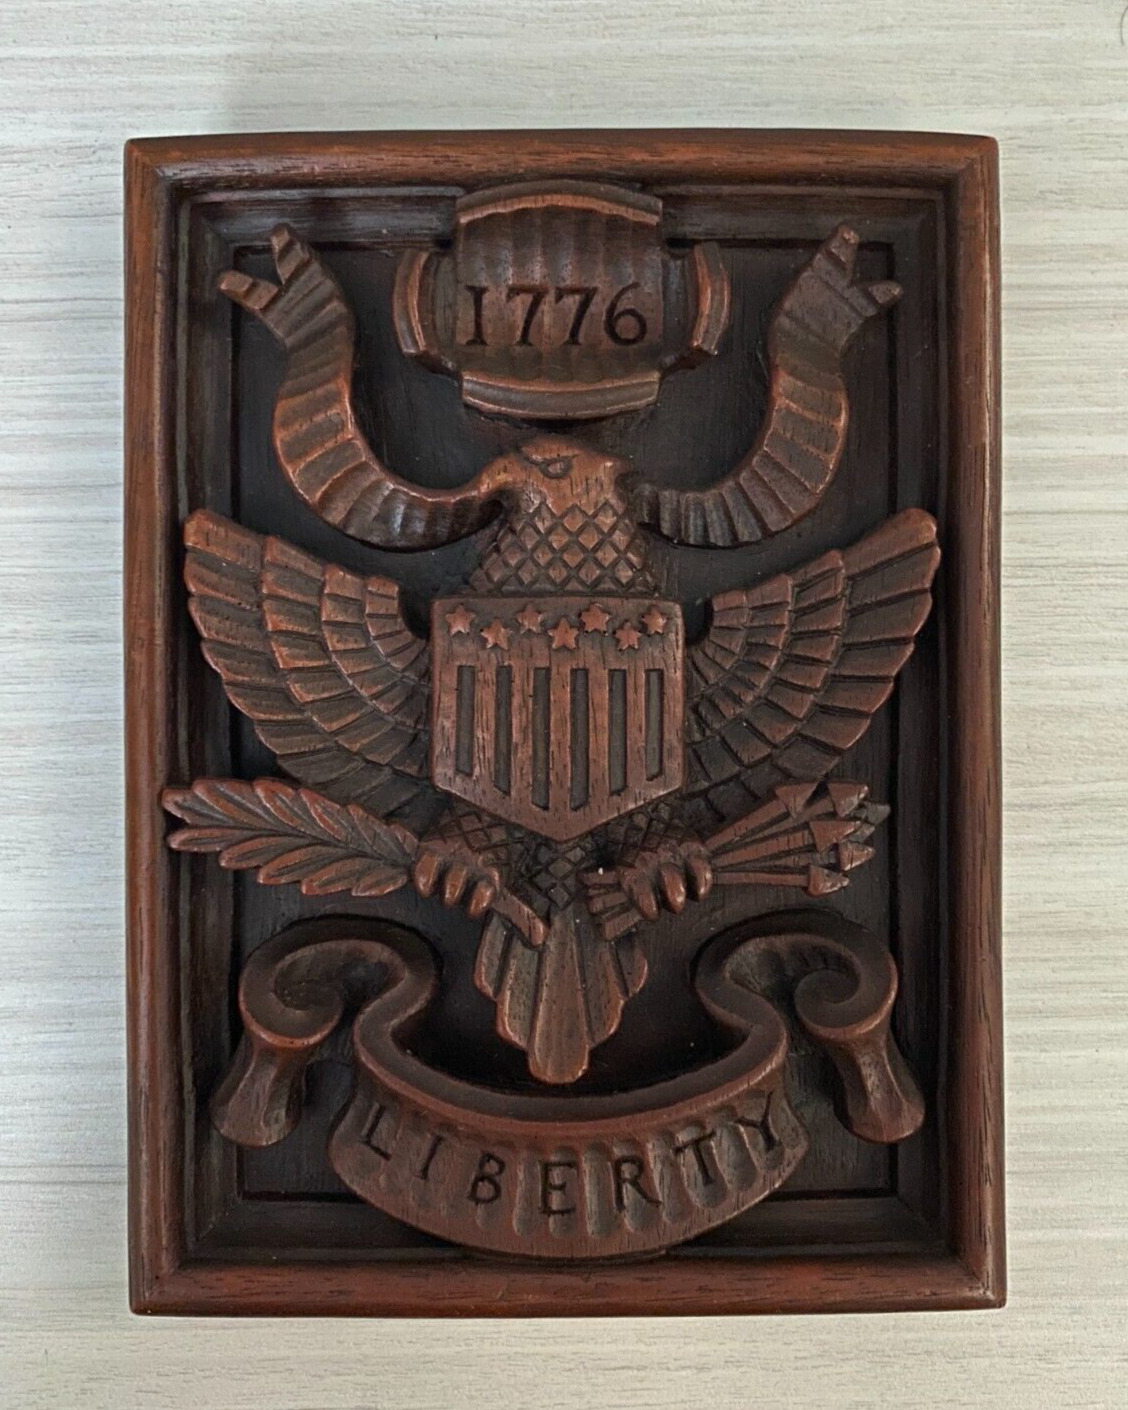 Old Vintage Wood Carved 1776 LIBERTY Wall Hanging 8.25 x 6.25 Inches